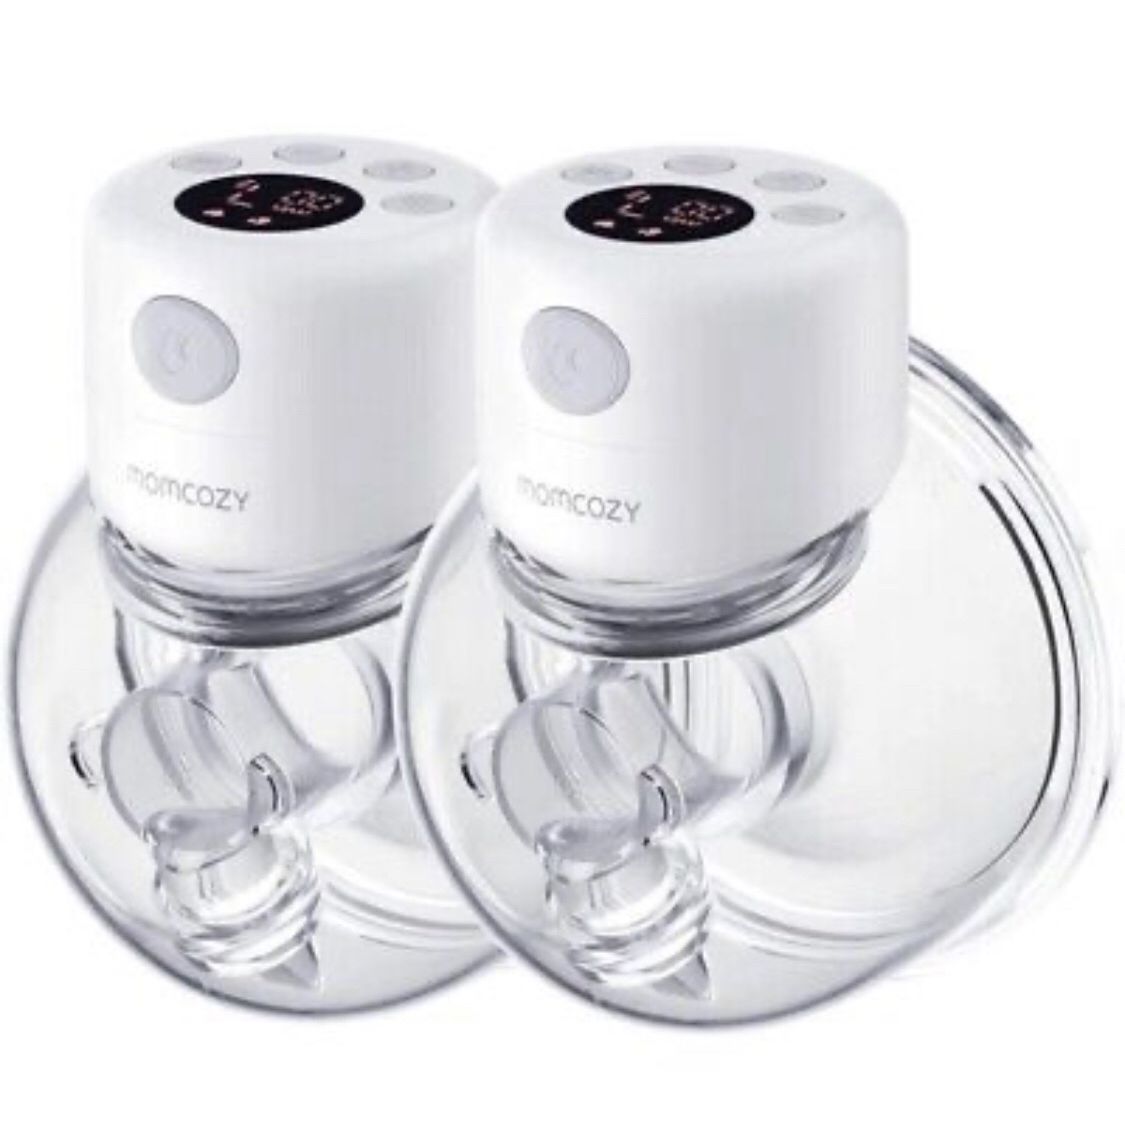 Momcozy S12 9-Levels Double Wearable Breast Pump - White New